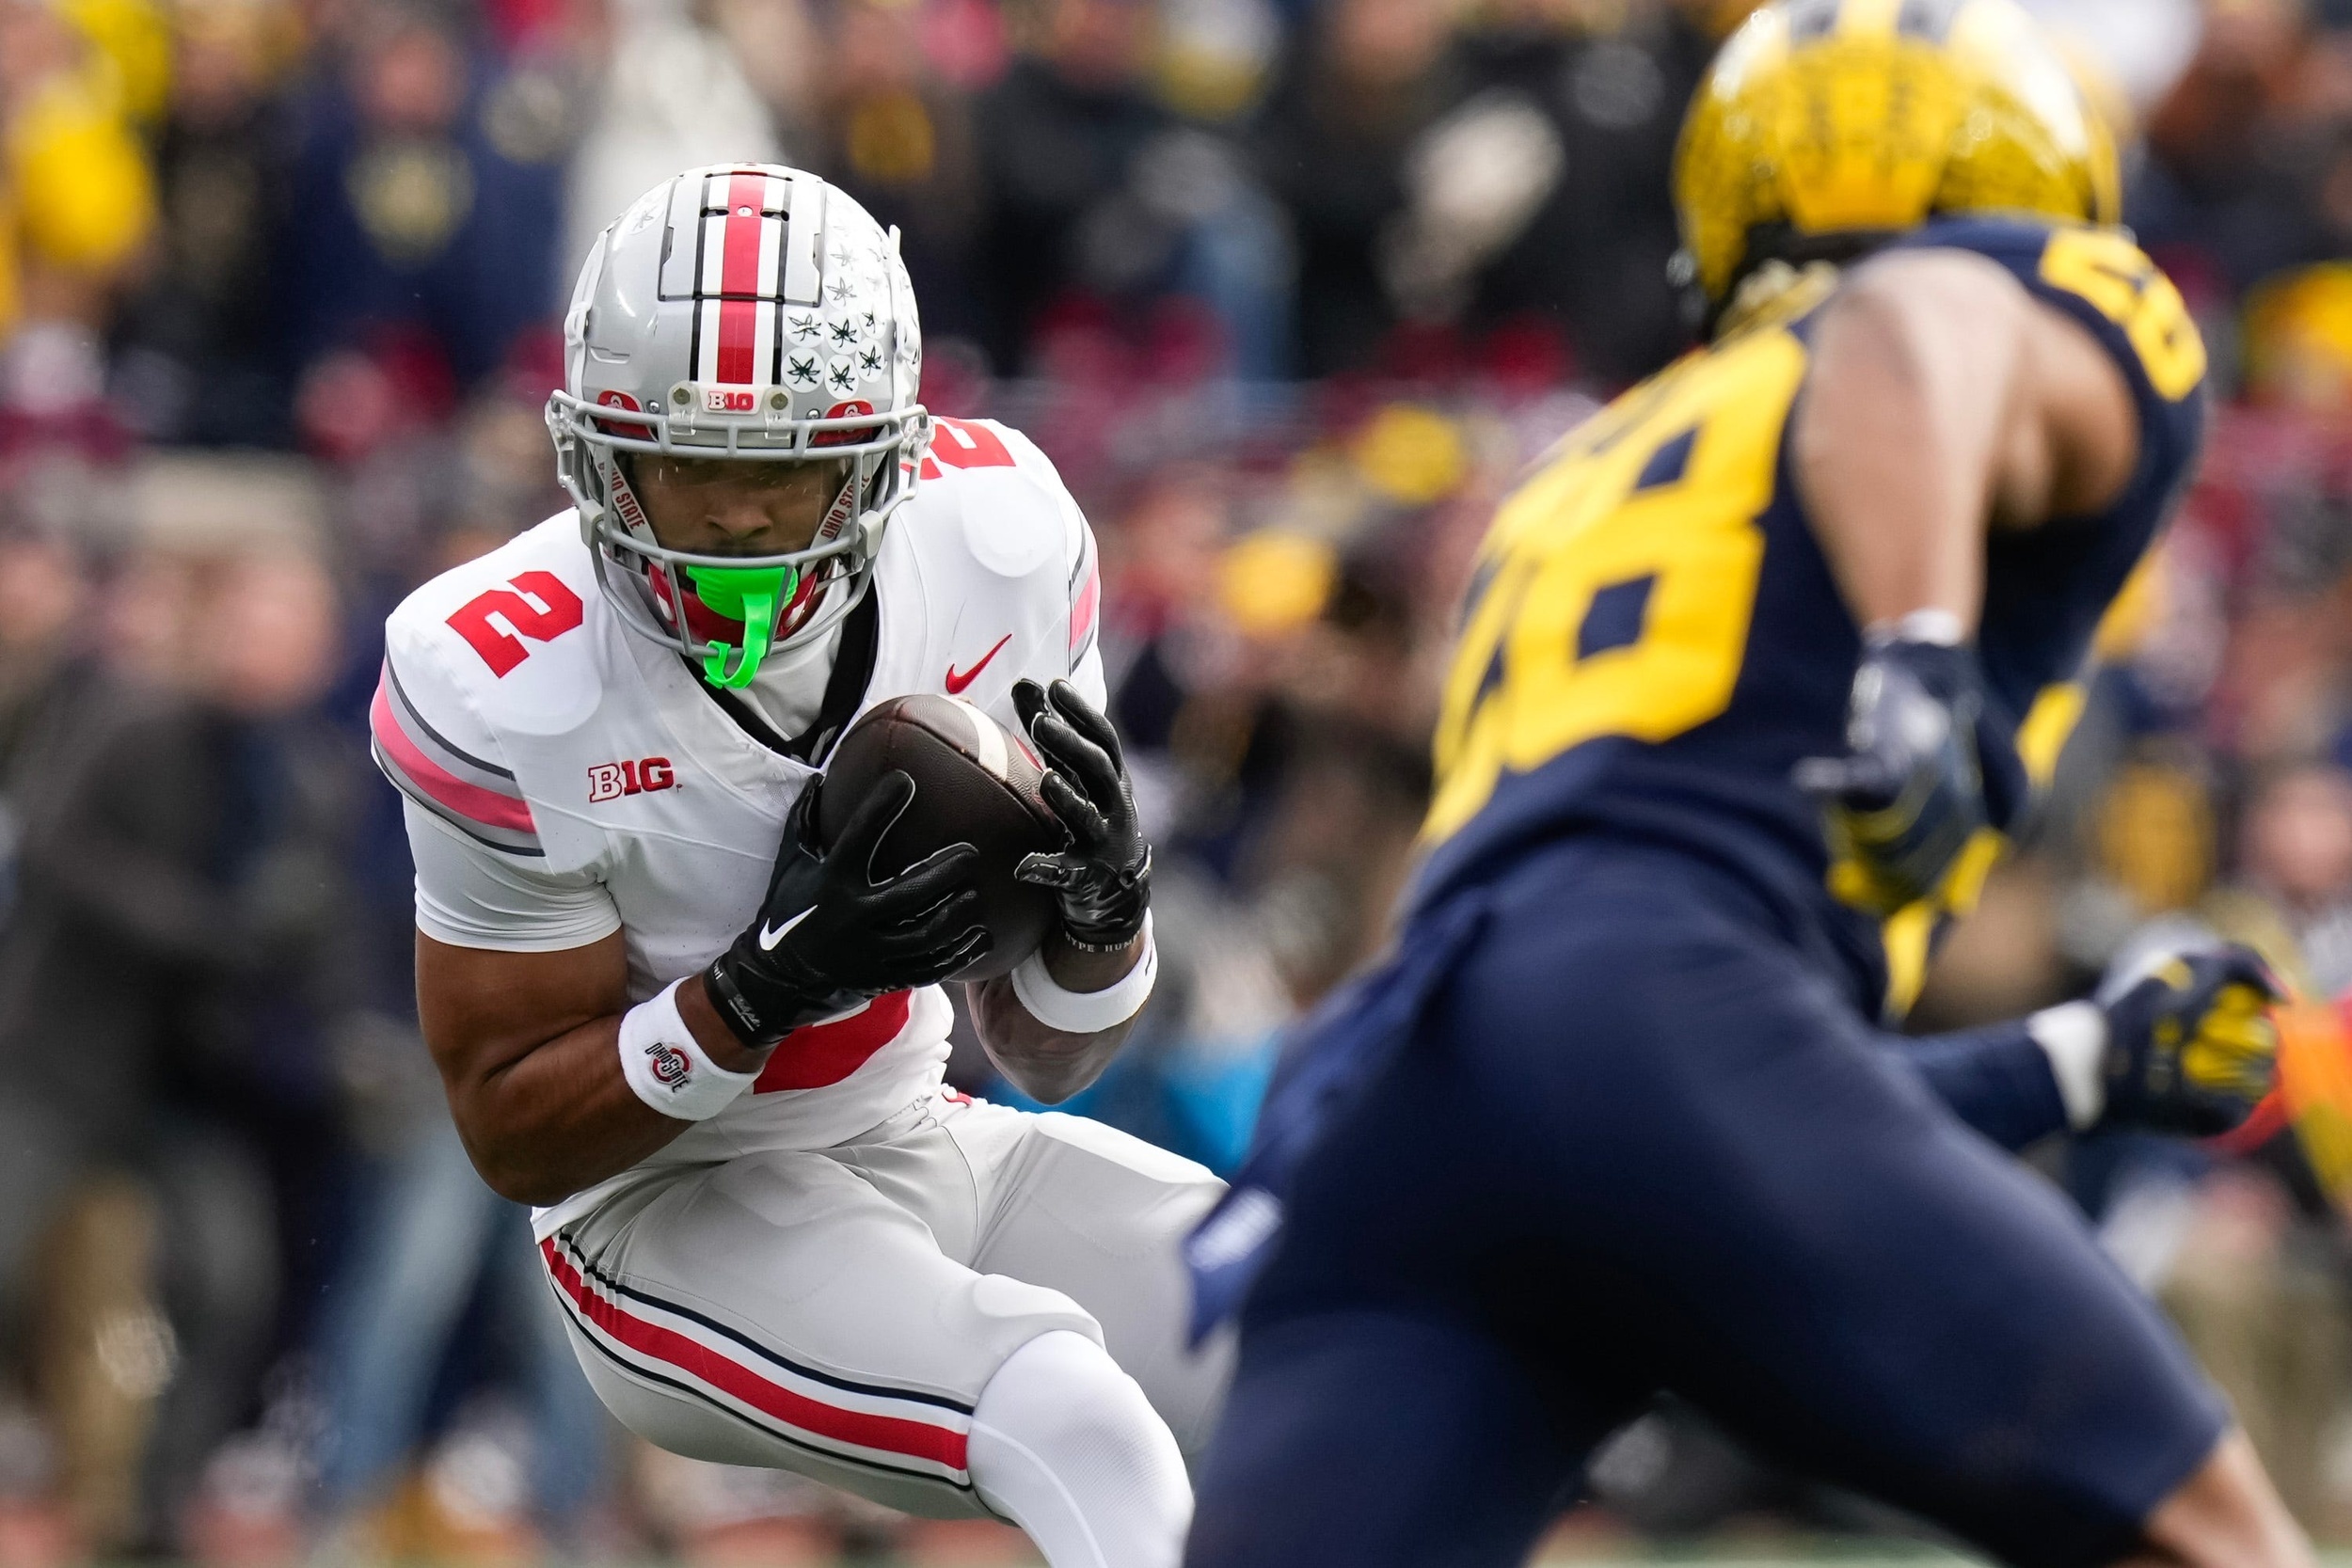 Ohio State WR opts out of 2024 NFL Draft, returns for senior season